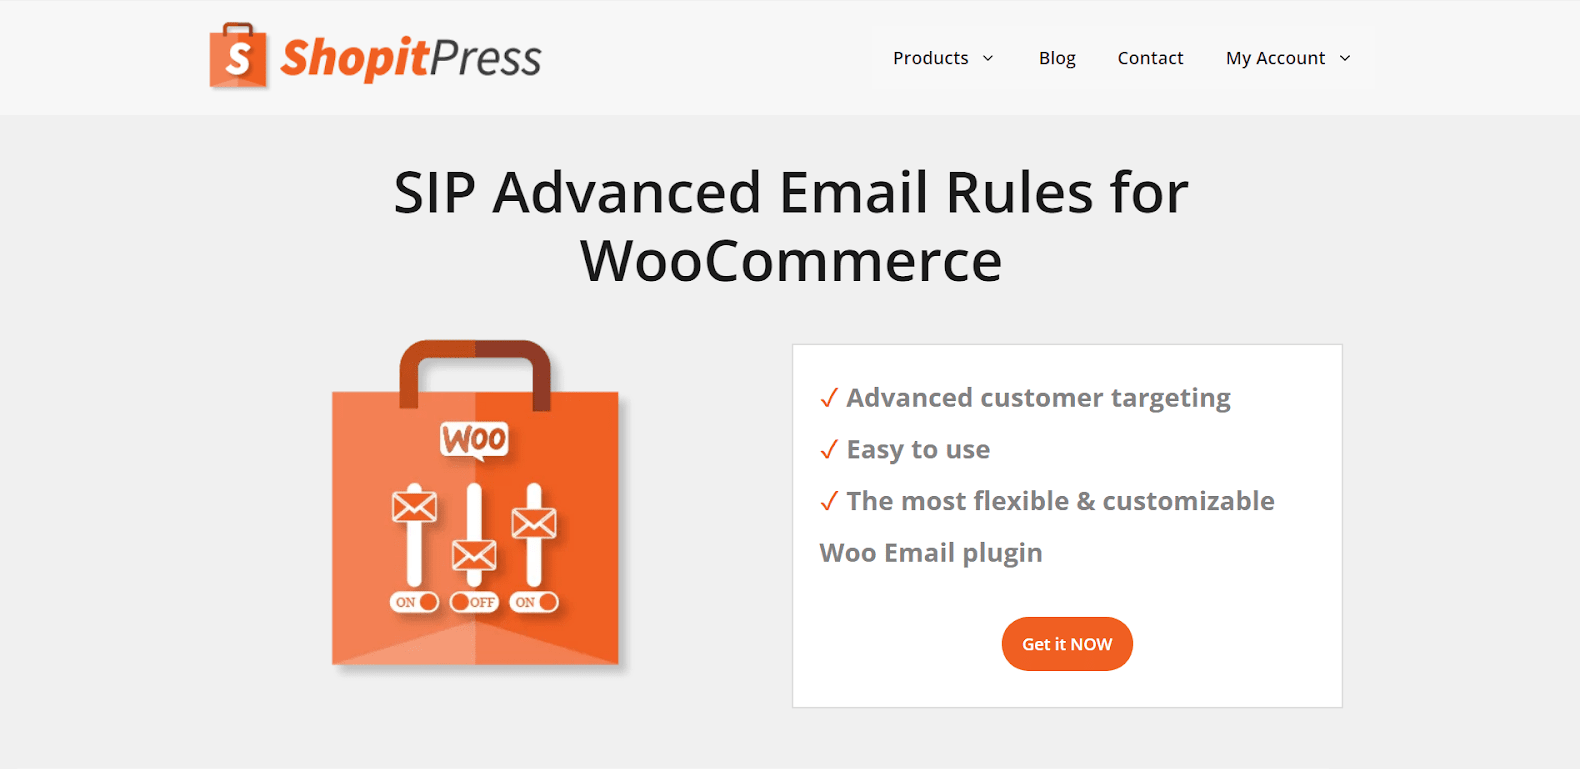 SIP Advanced Email Rules